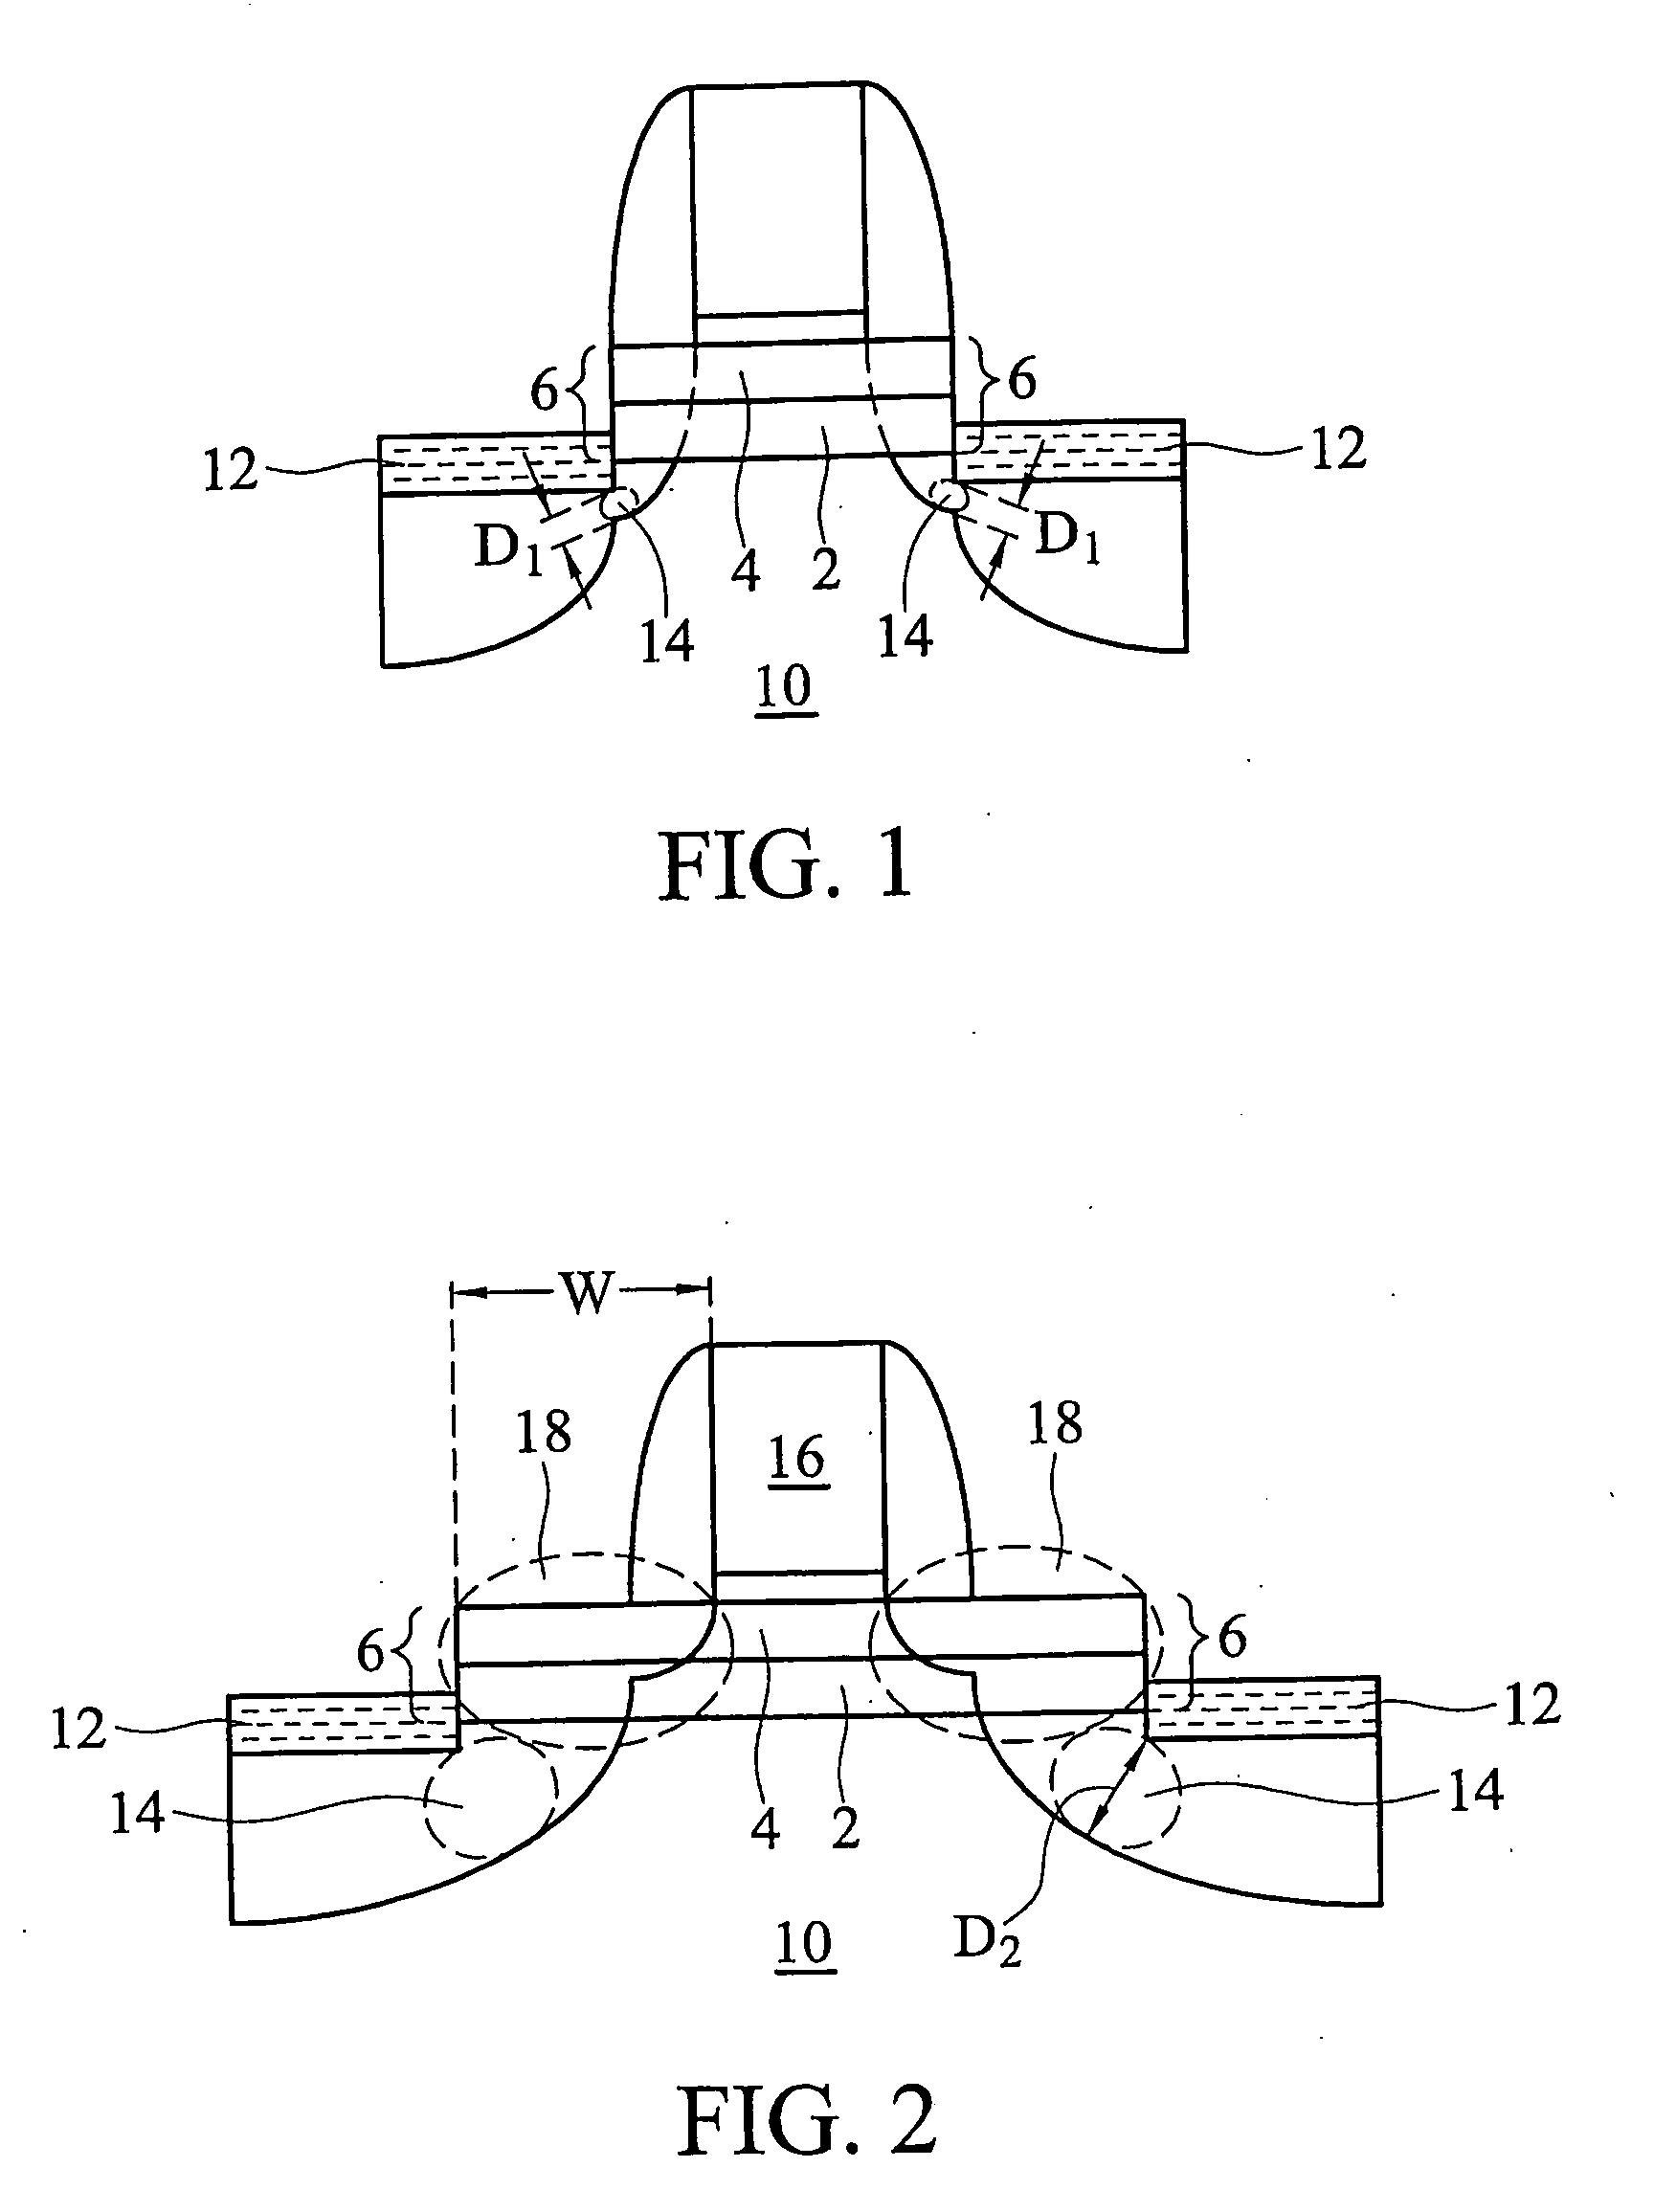 High performance transistor with a highly stressed channel